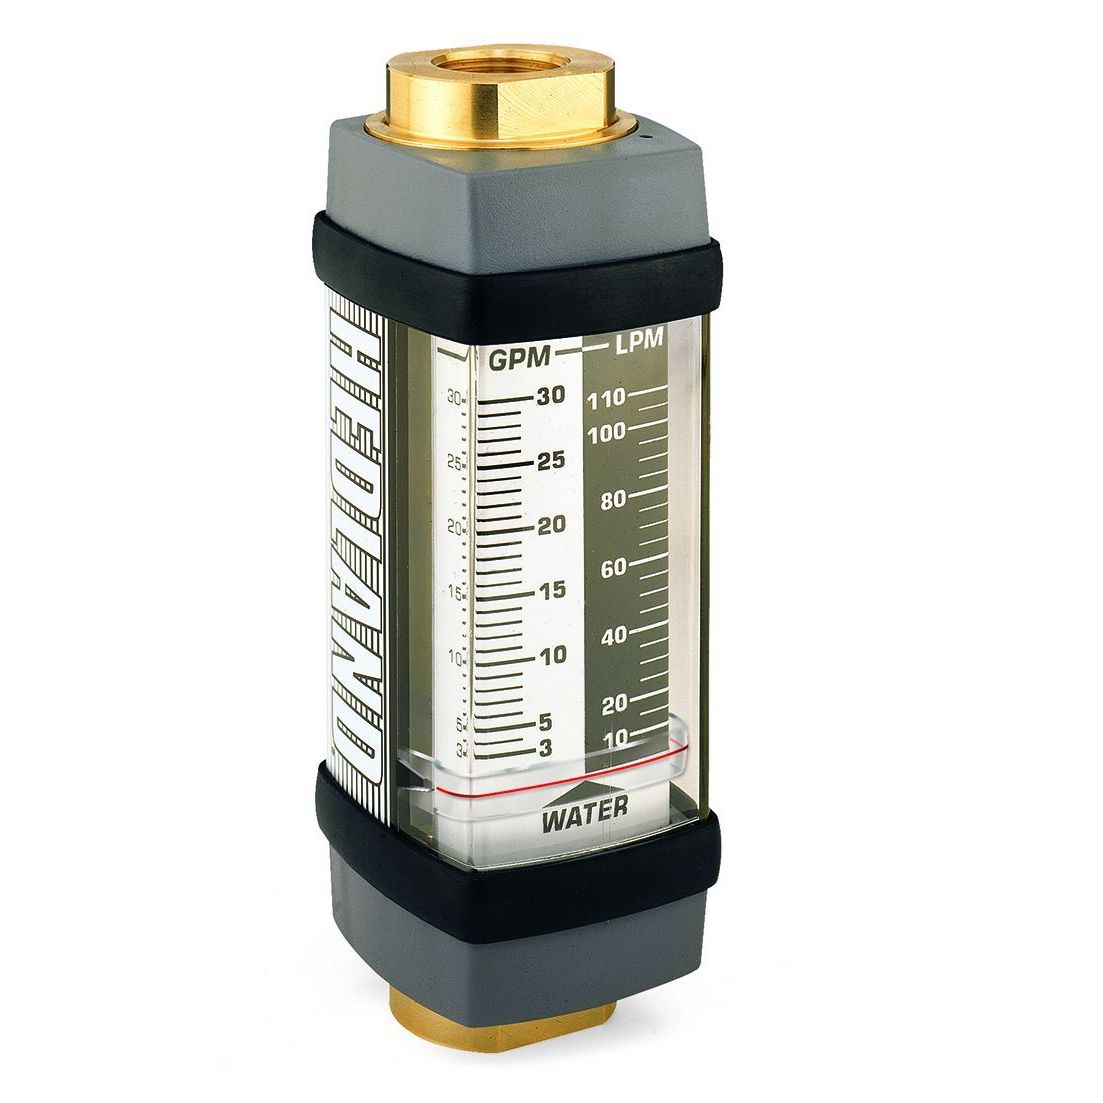 H704B-002 : Hedland 3500psi Brass Flow Meter for Water, #12 SAE (3/4), 0.2 to 2.0 GPM